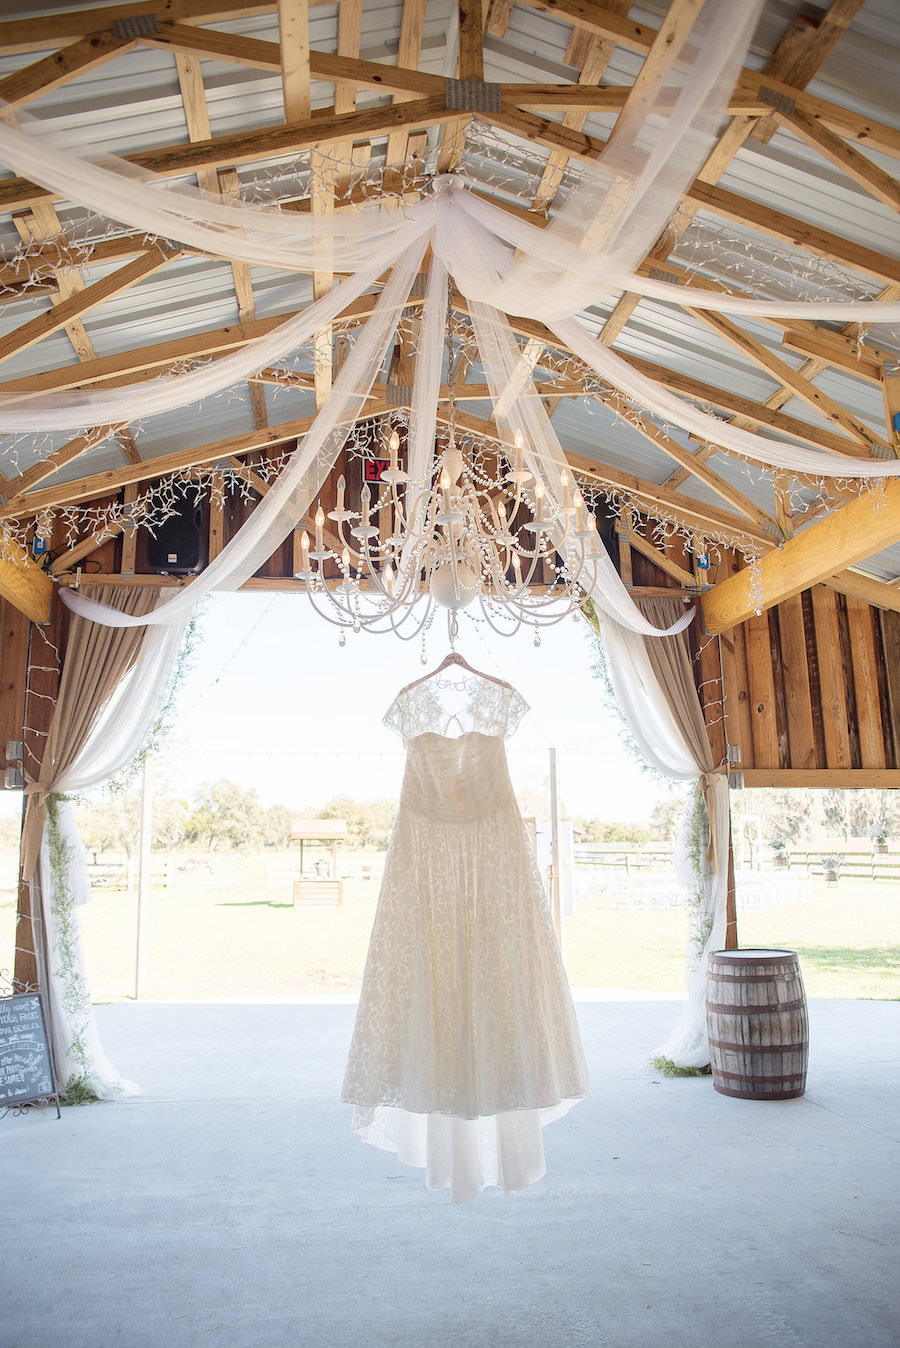 Ivory, Lace Wedding Dress Hung on Chandelier in Wooden Barn